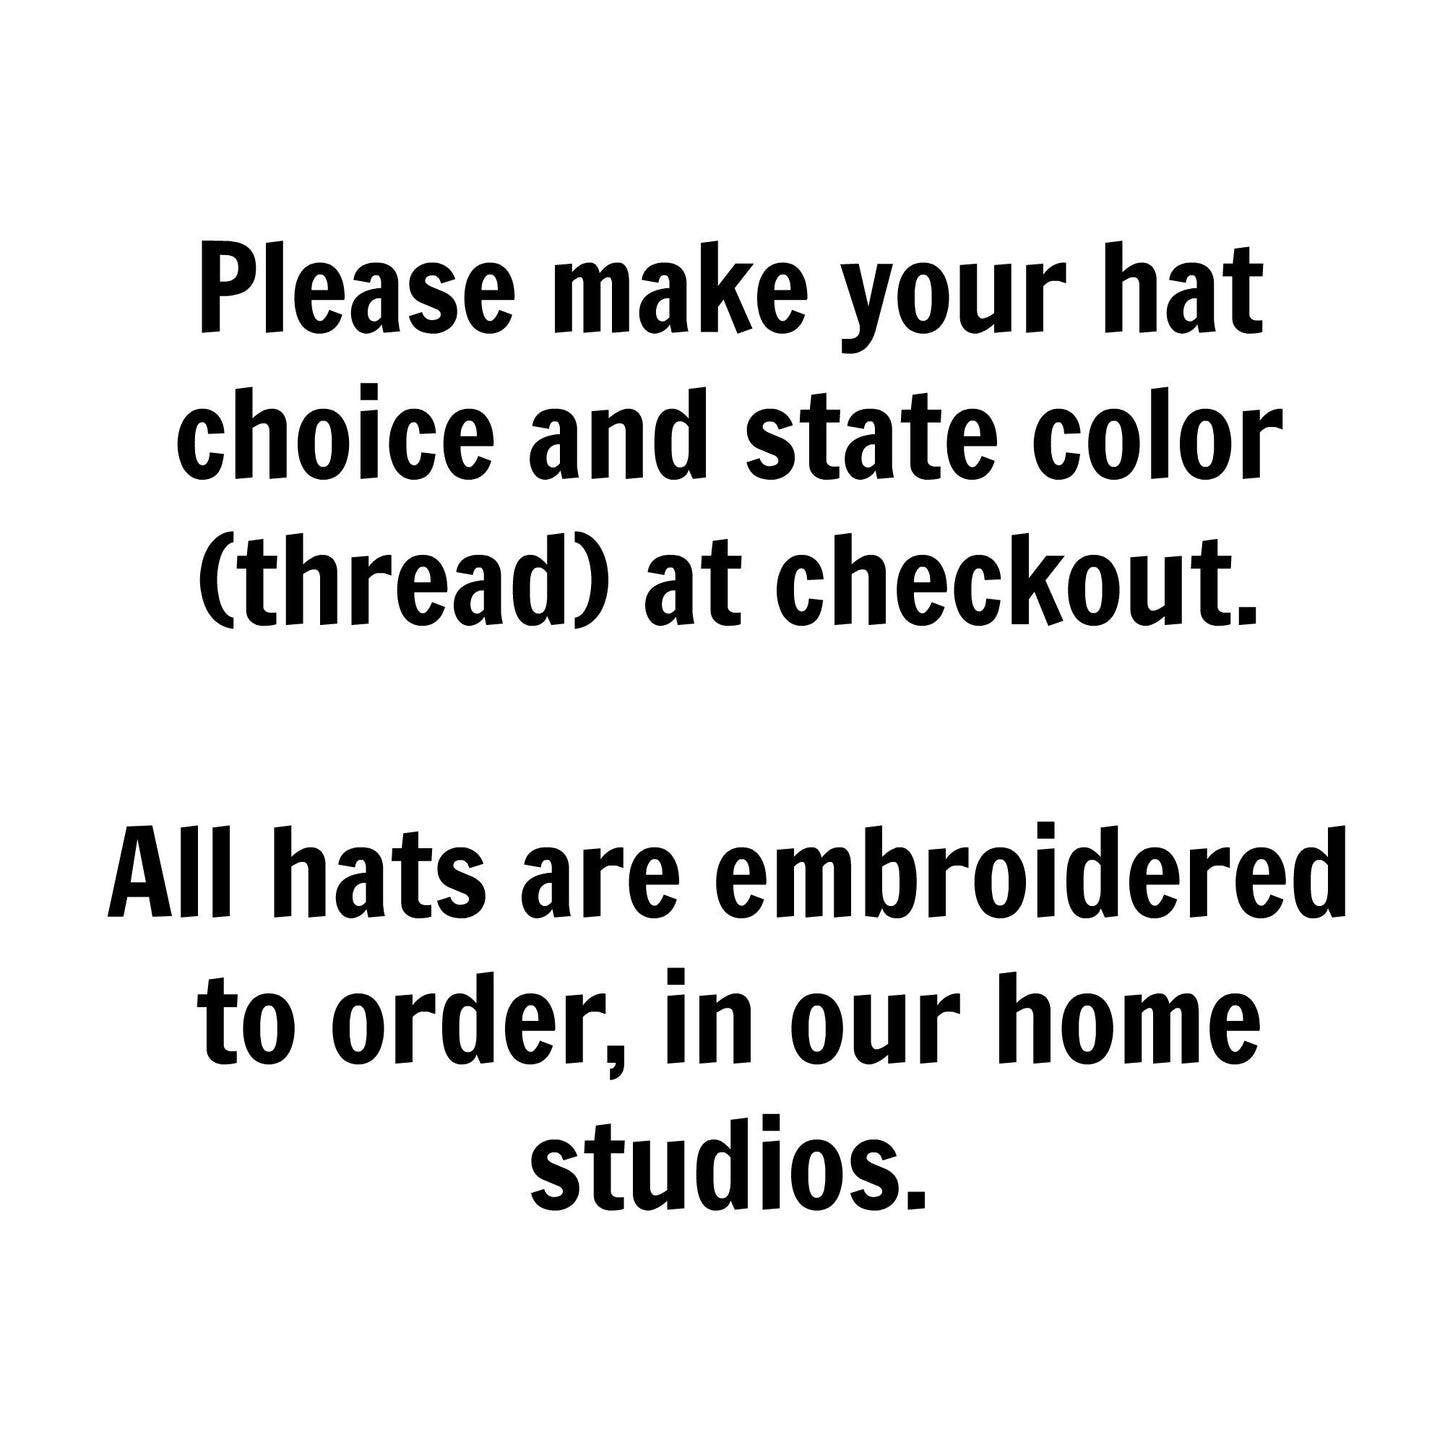 South Carolina Hat - Distressed Snapback Trucker Hat - South Carolina State Outline - Many Colors Available